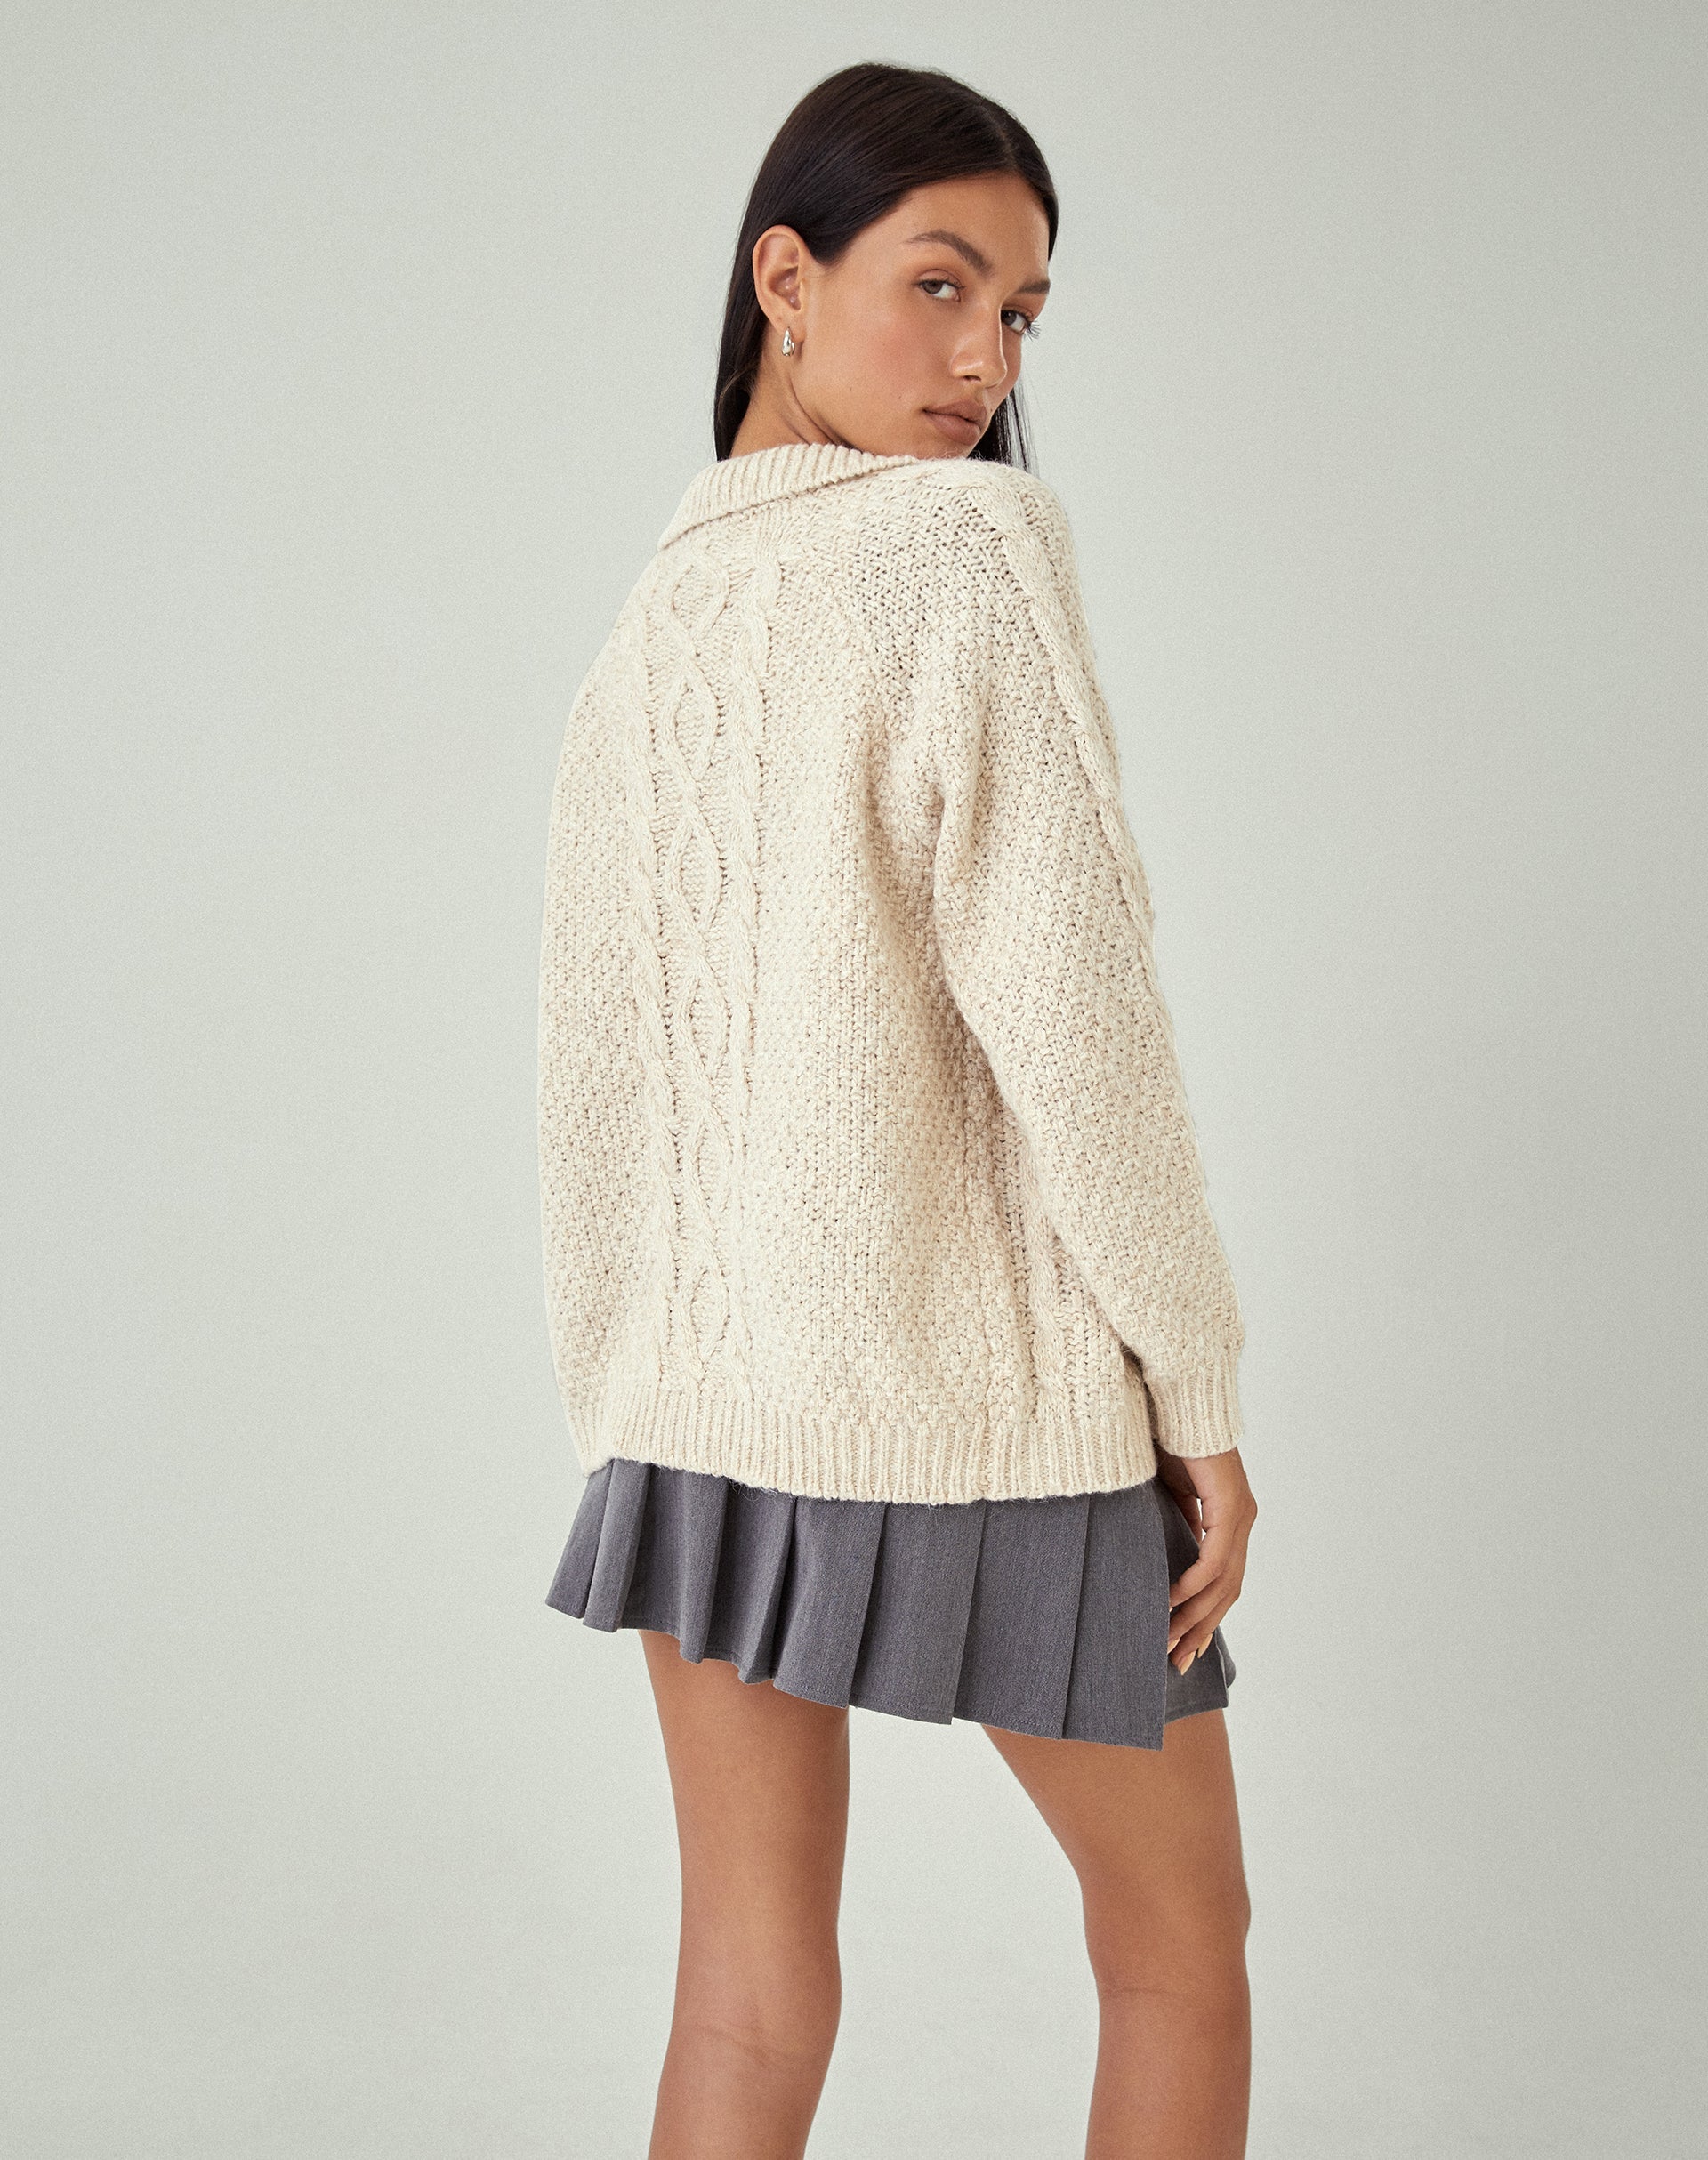 image of MOTEL X JACQUIE Triny Cardigan in Cable Knit Oatmeal